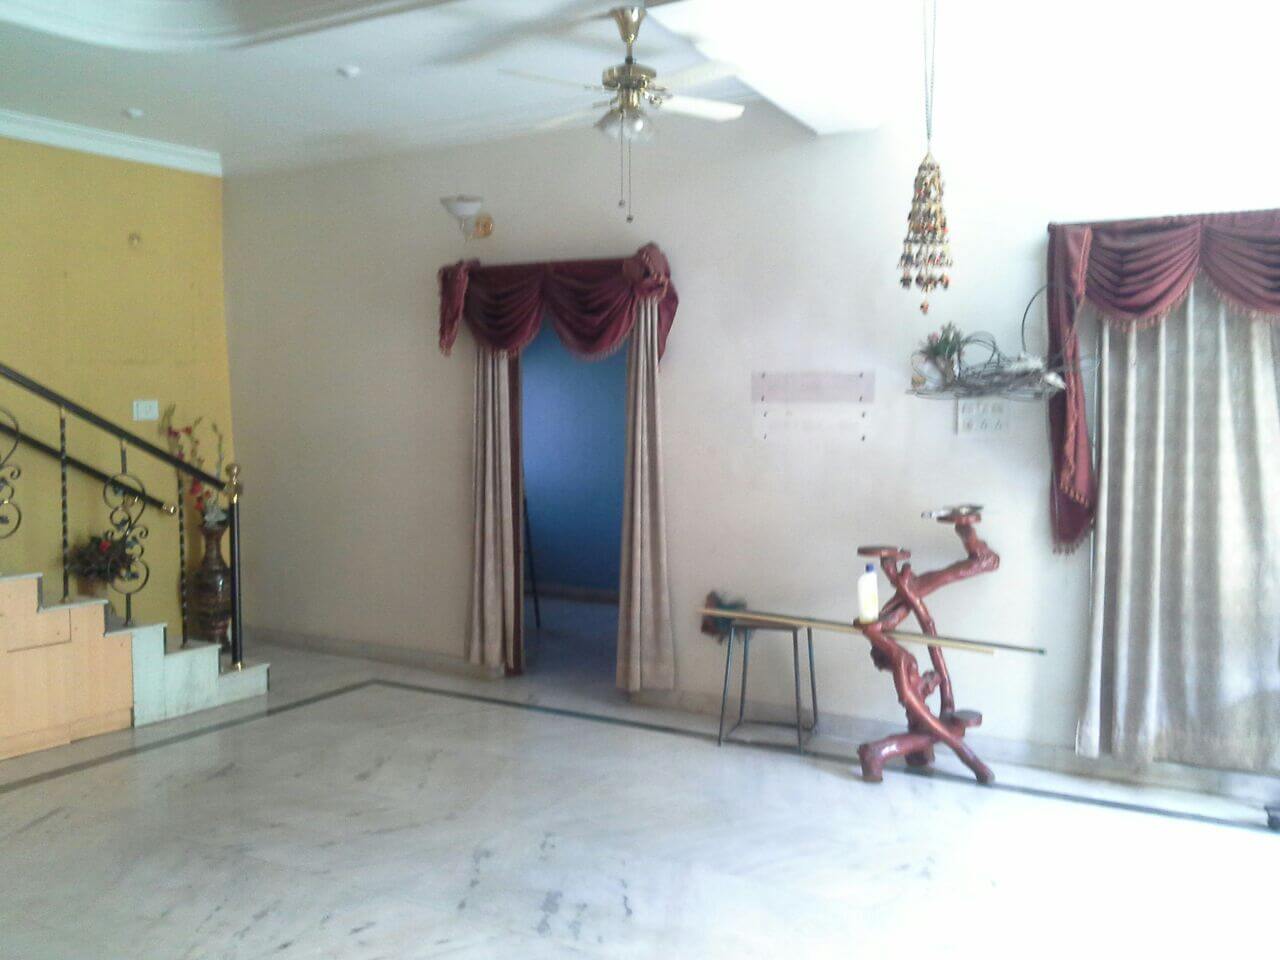 Duplex House or Commercial purpose space for Rent in Nandini Layout.